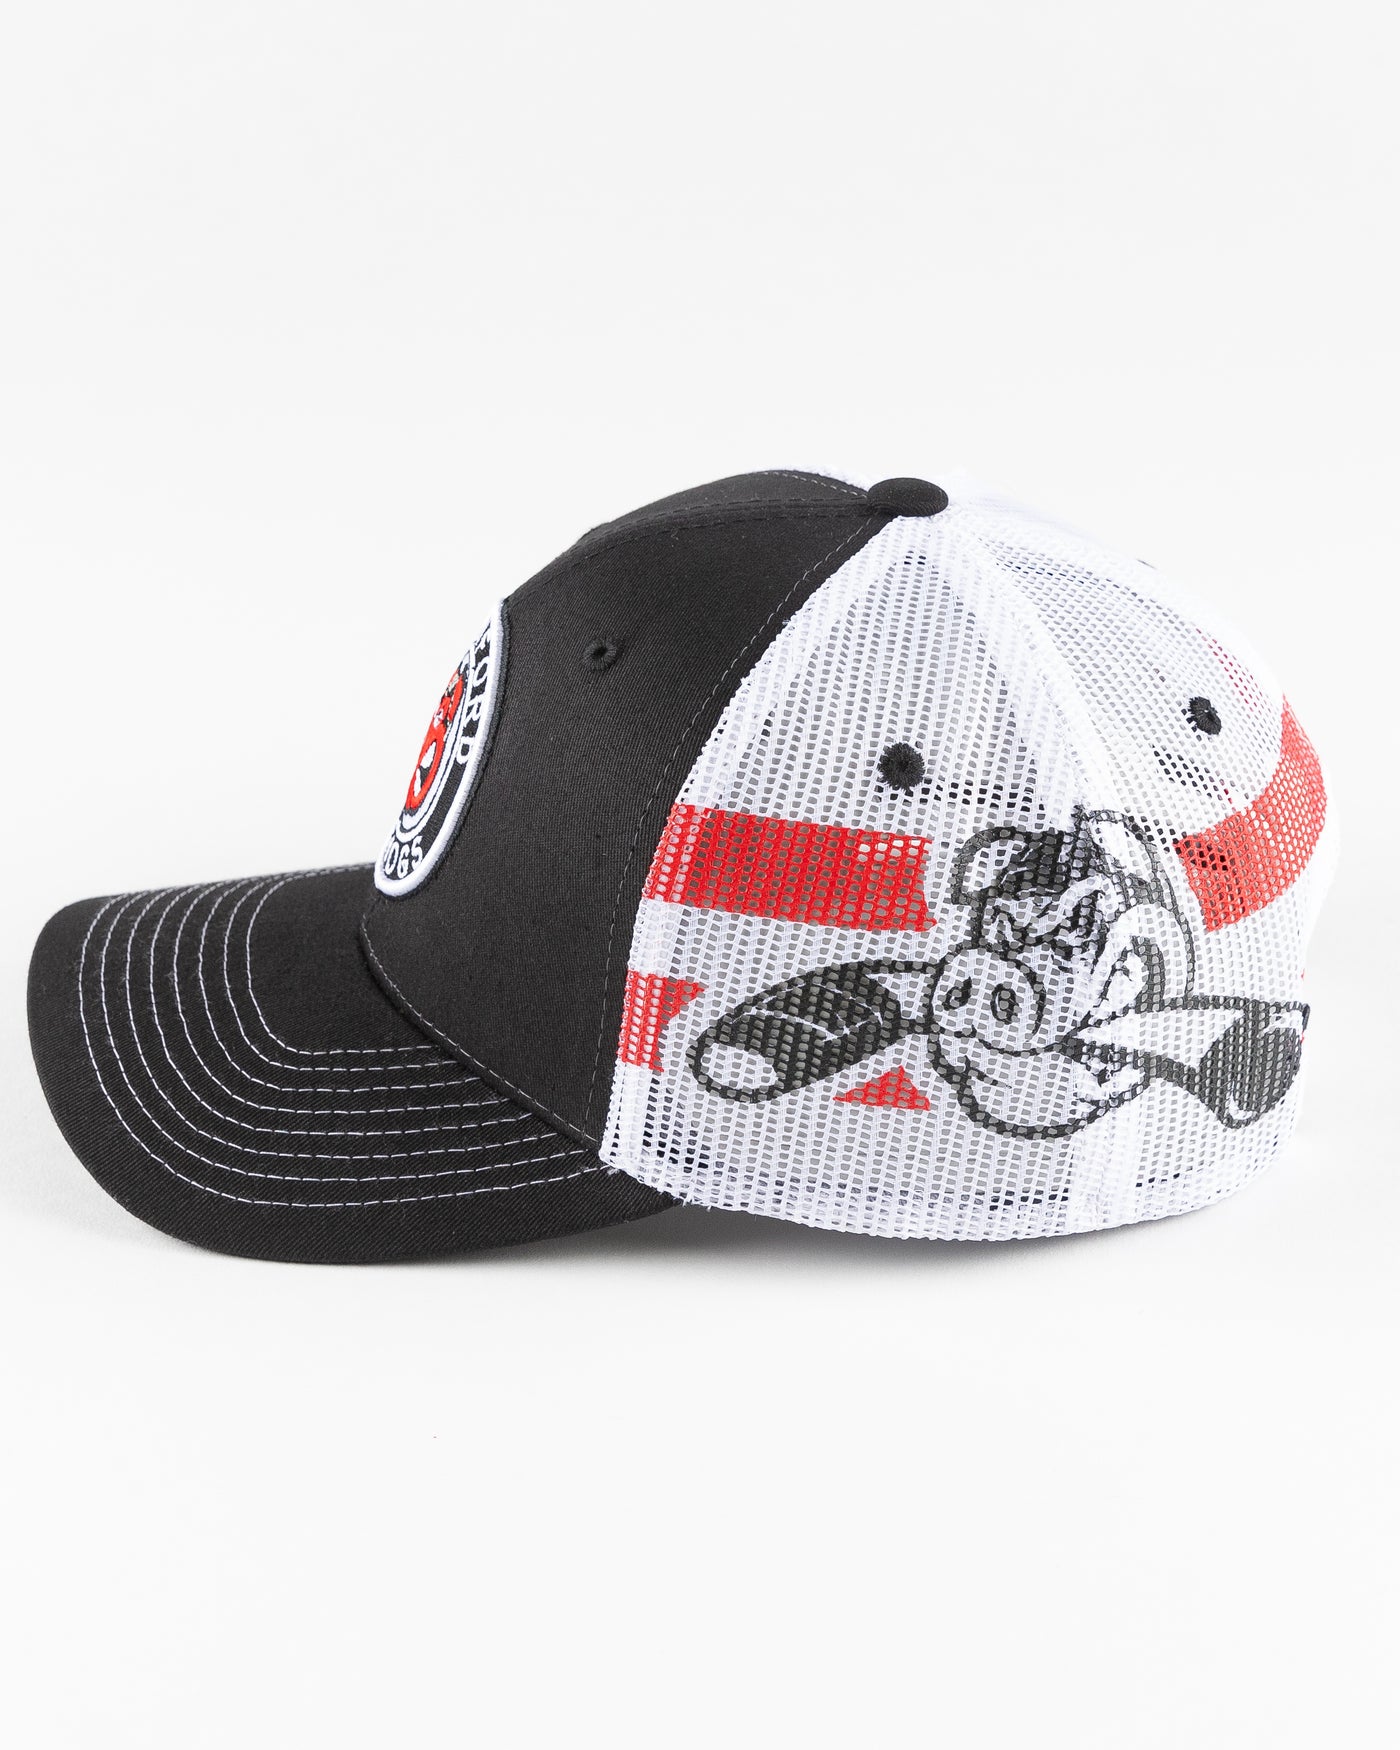 Rockford IceHogs black and white trucker with embroidered patch on front - left side lay flat